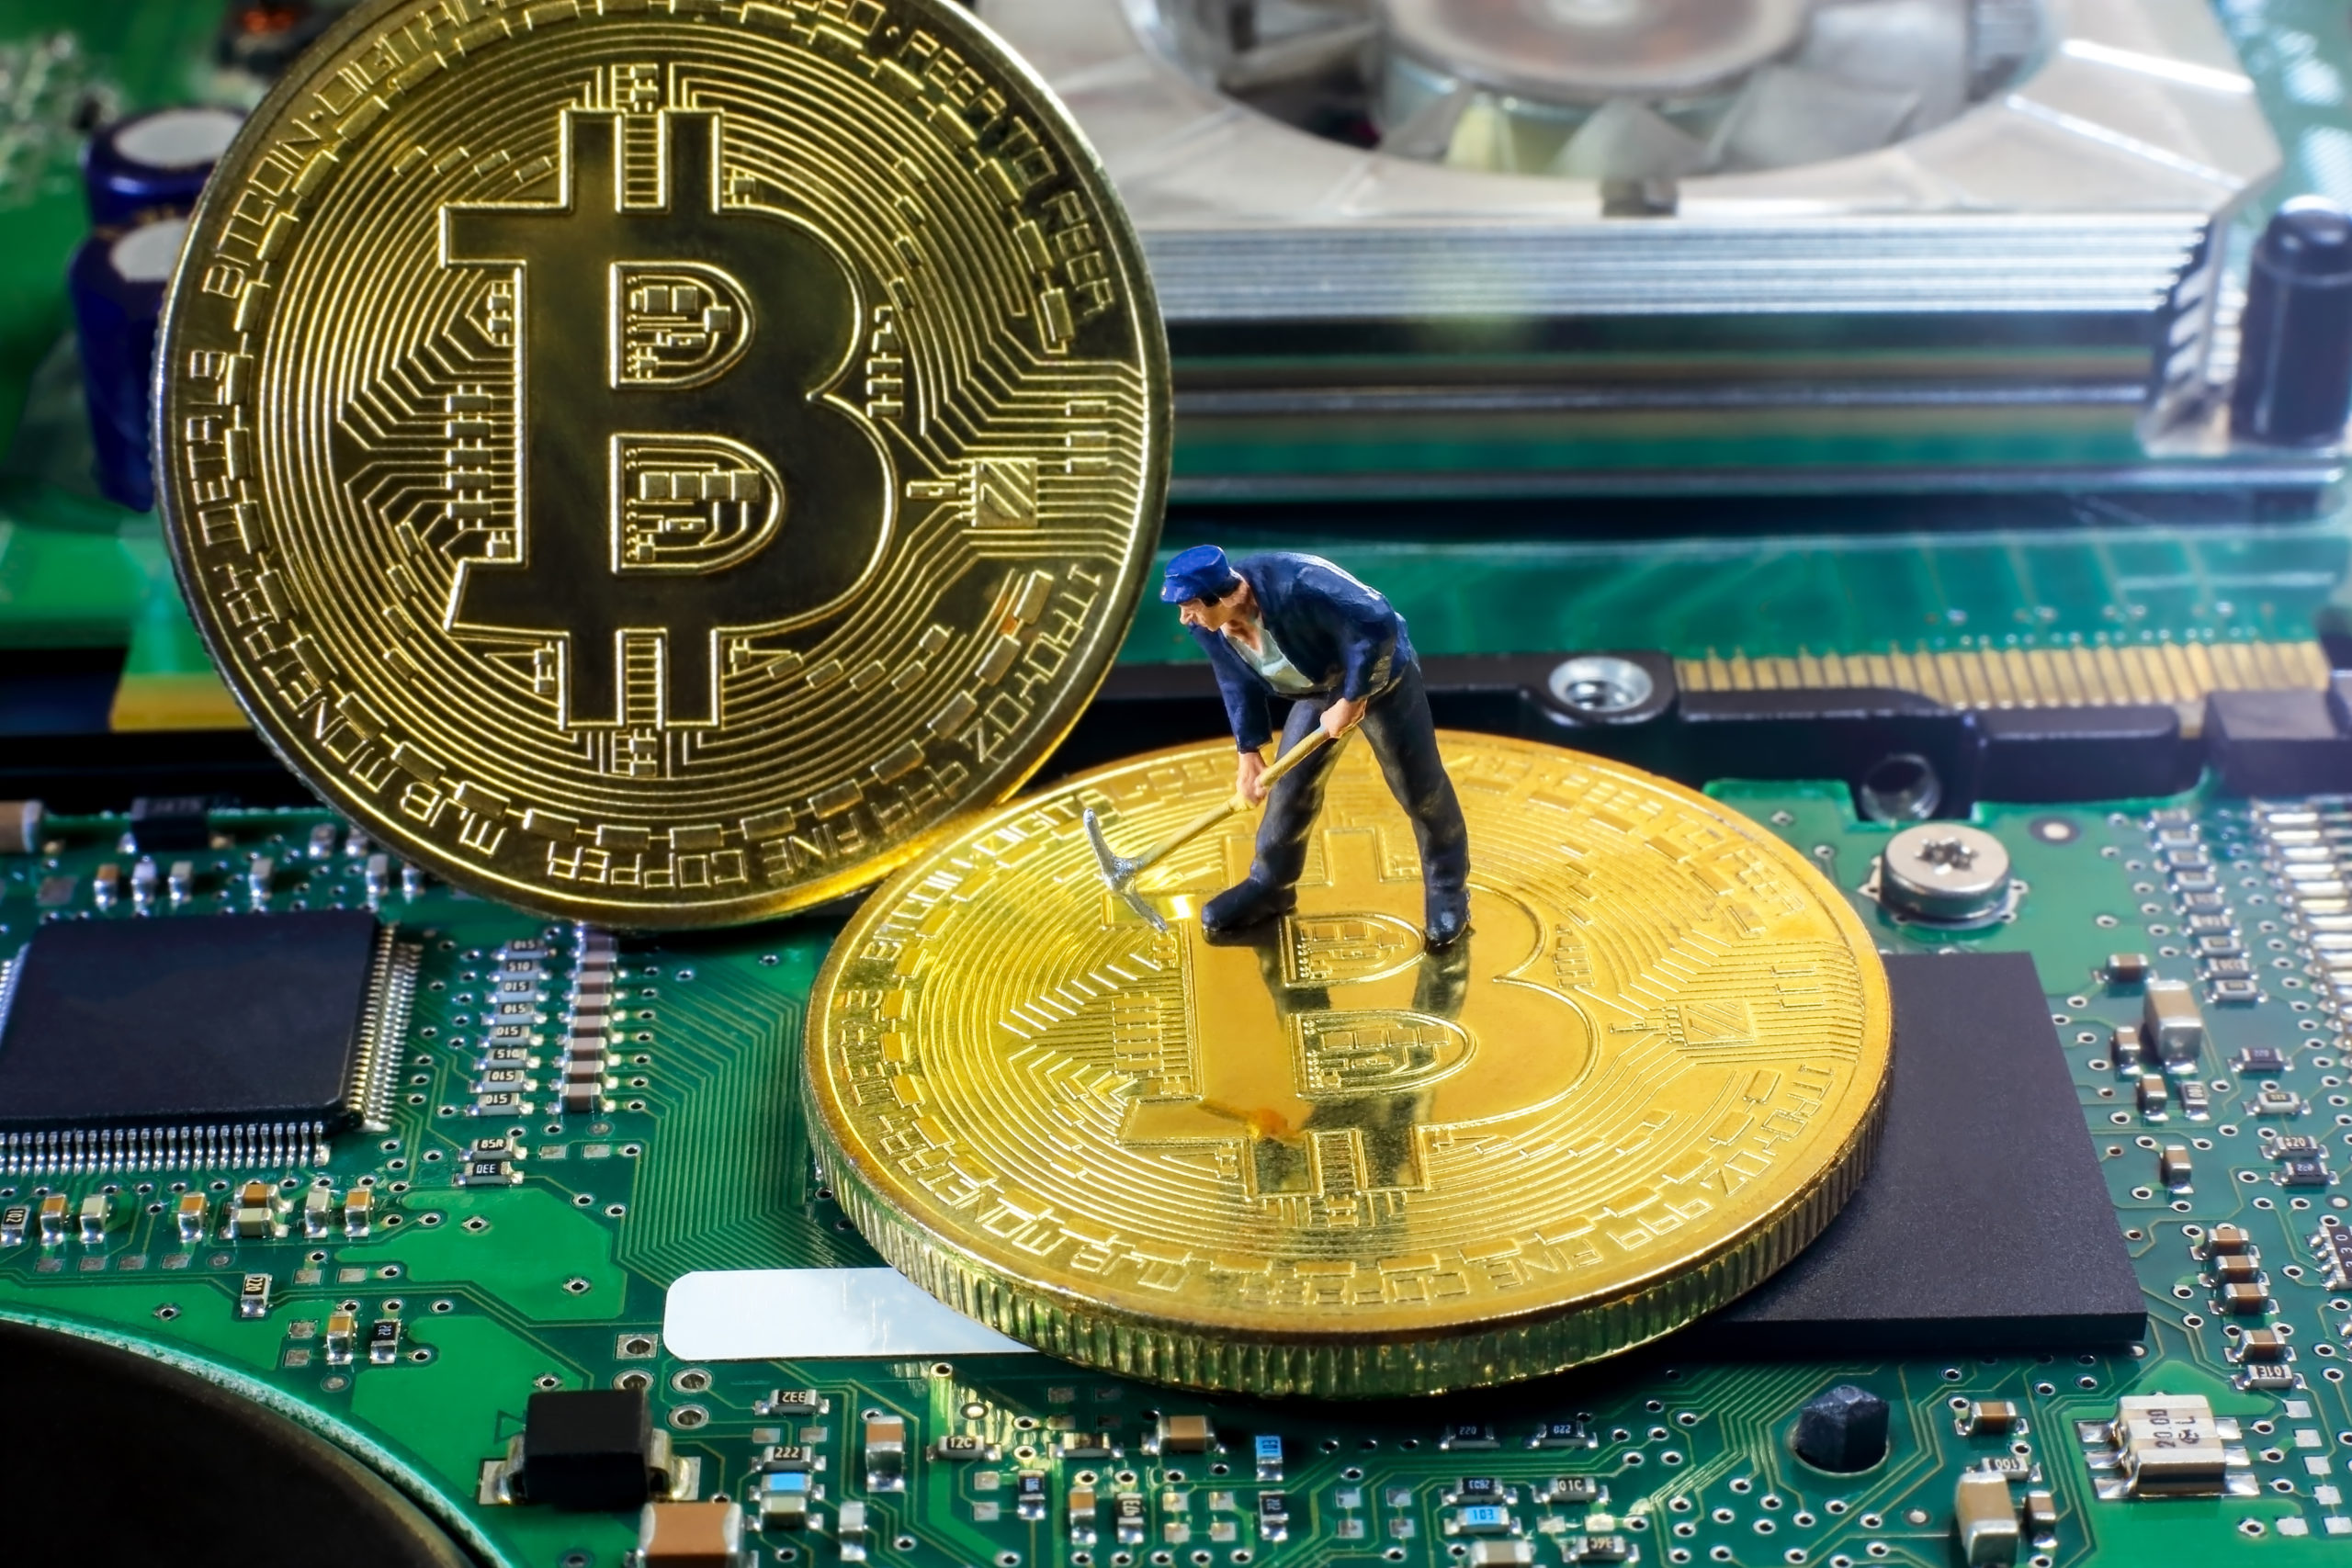 Research: Pioneer Bitcoin miners chose to preserve network instead of abusing power